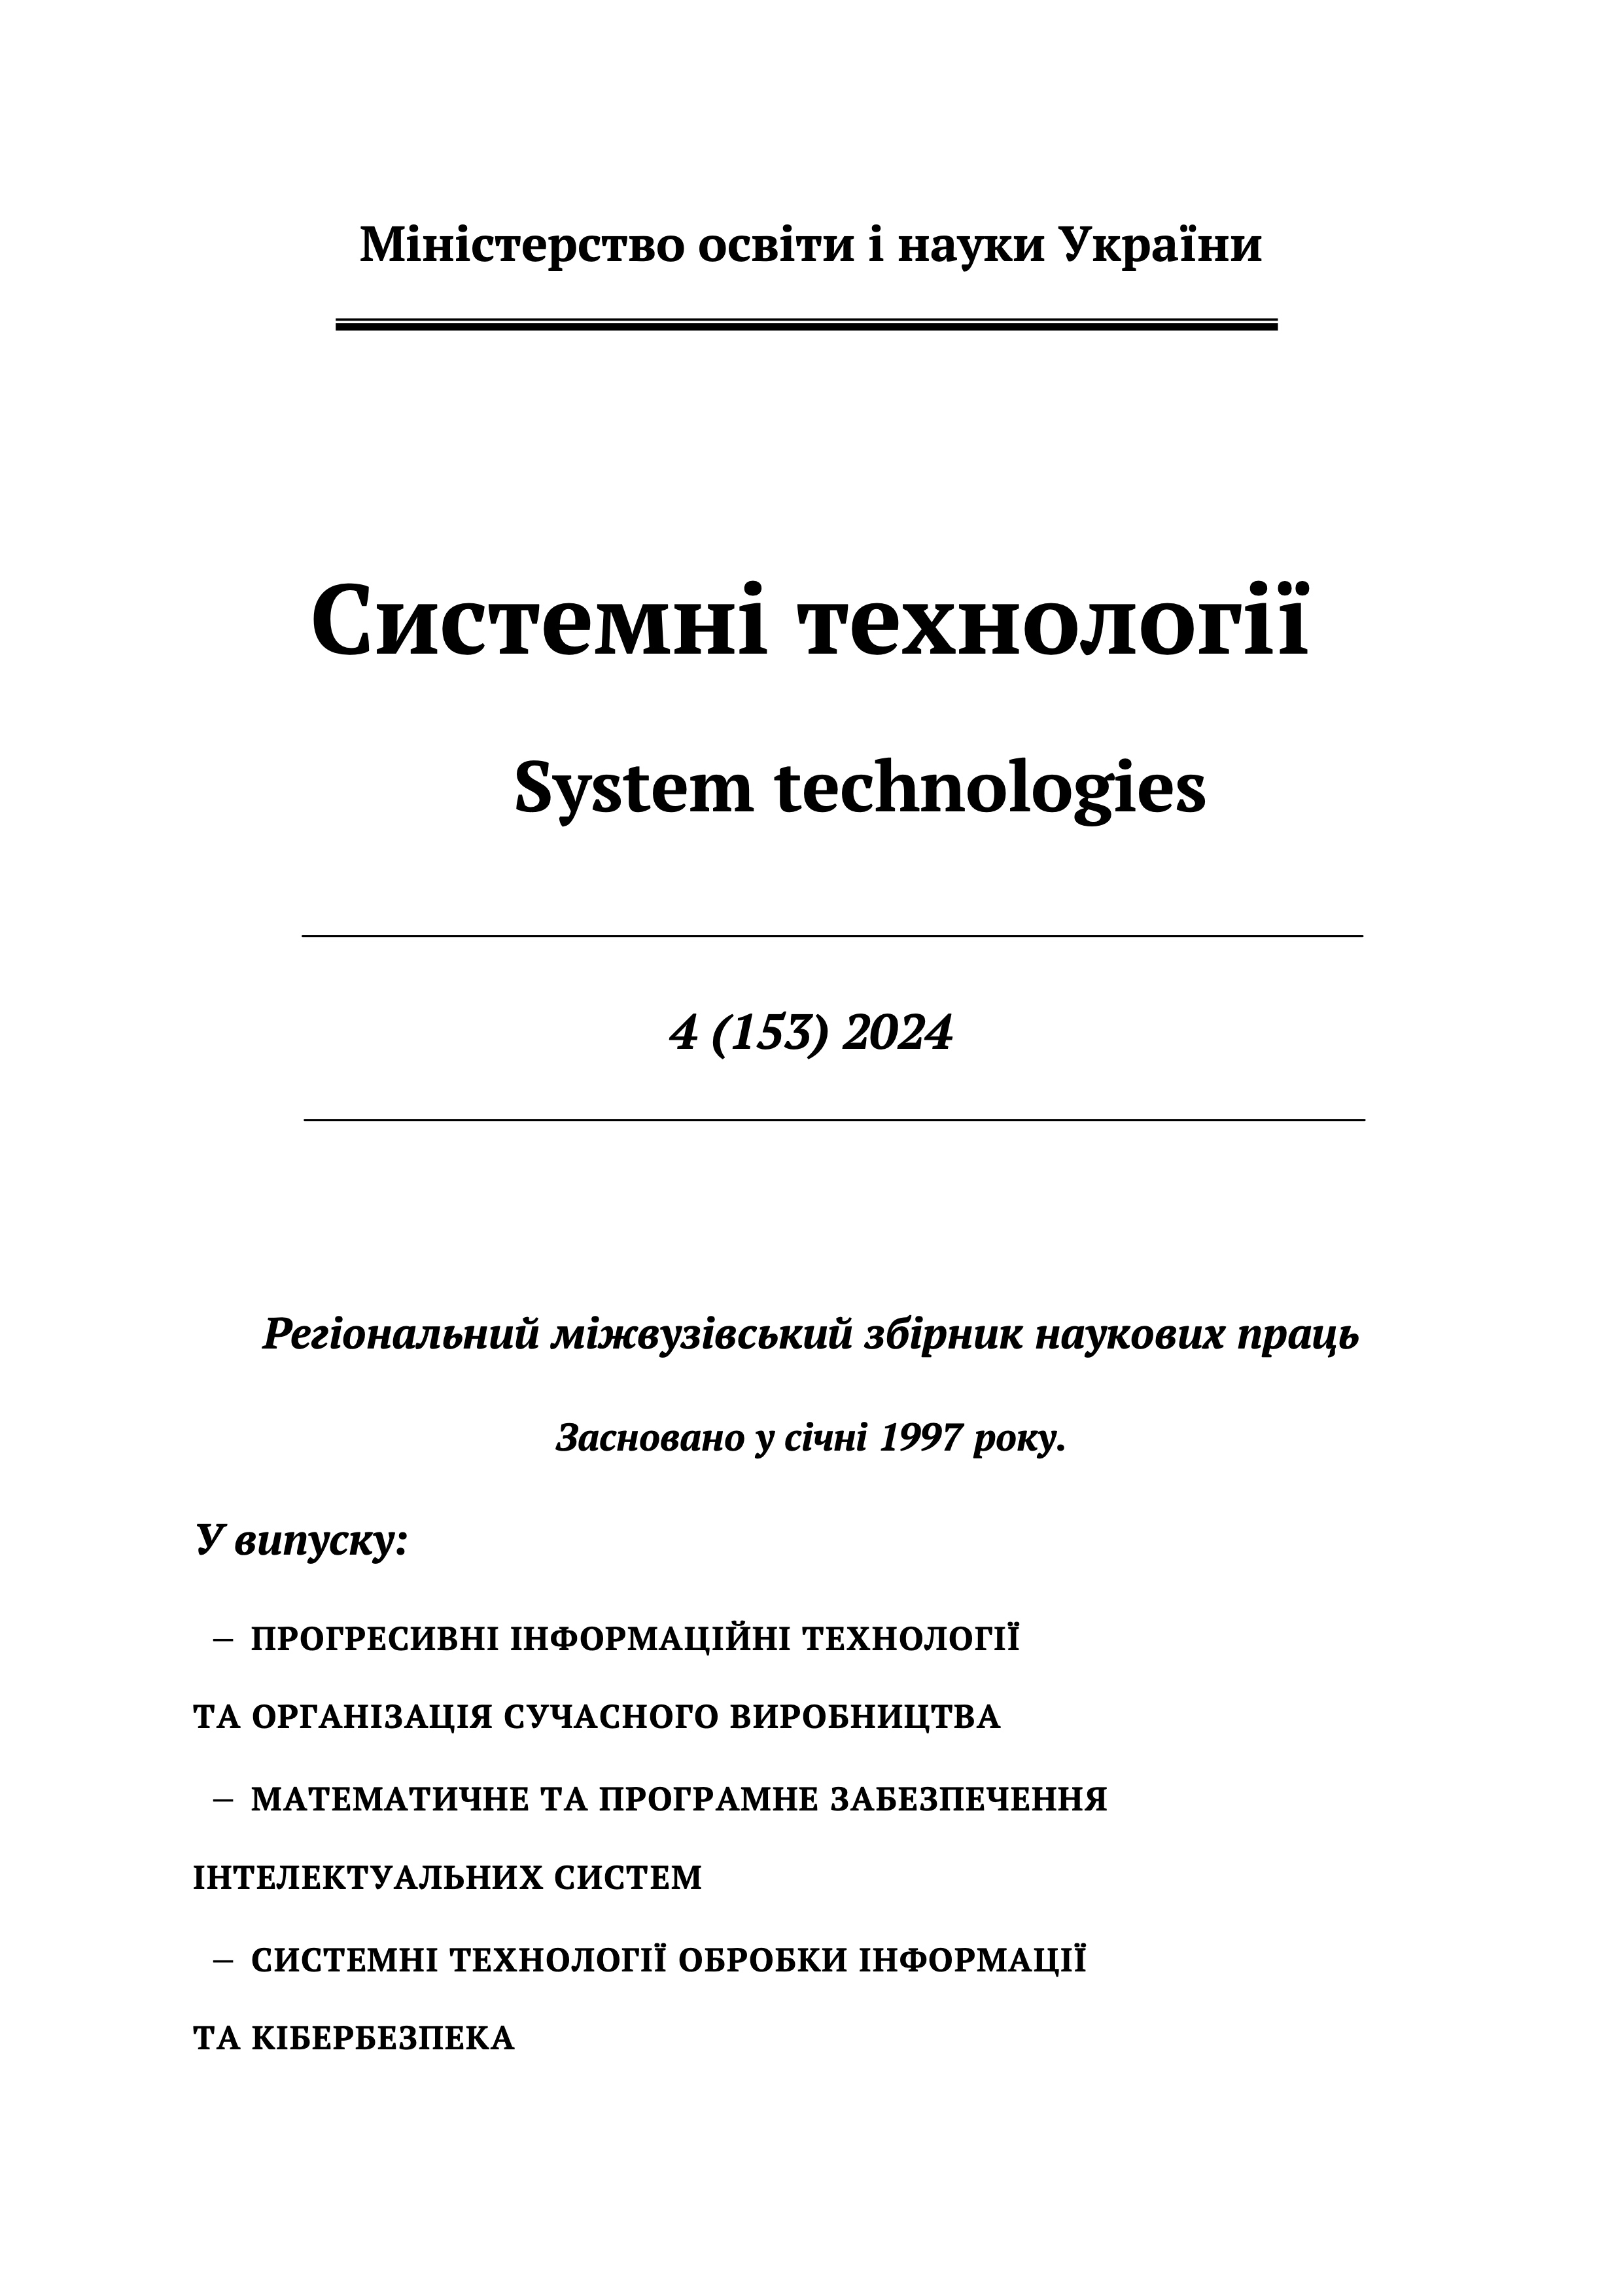 					View Vol. 4 No. 153 (2024): System technologies
				